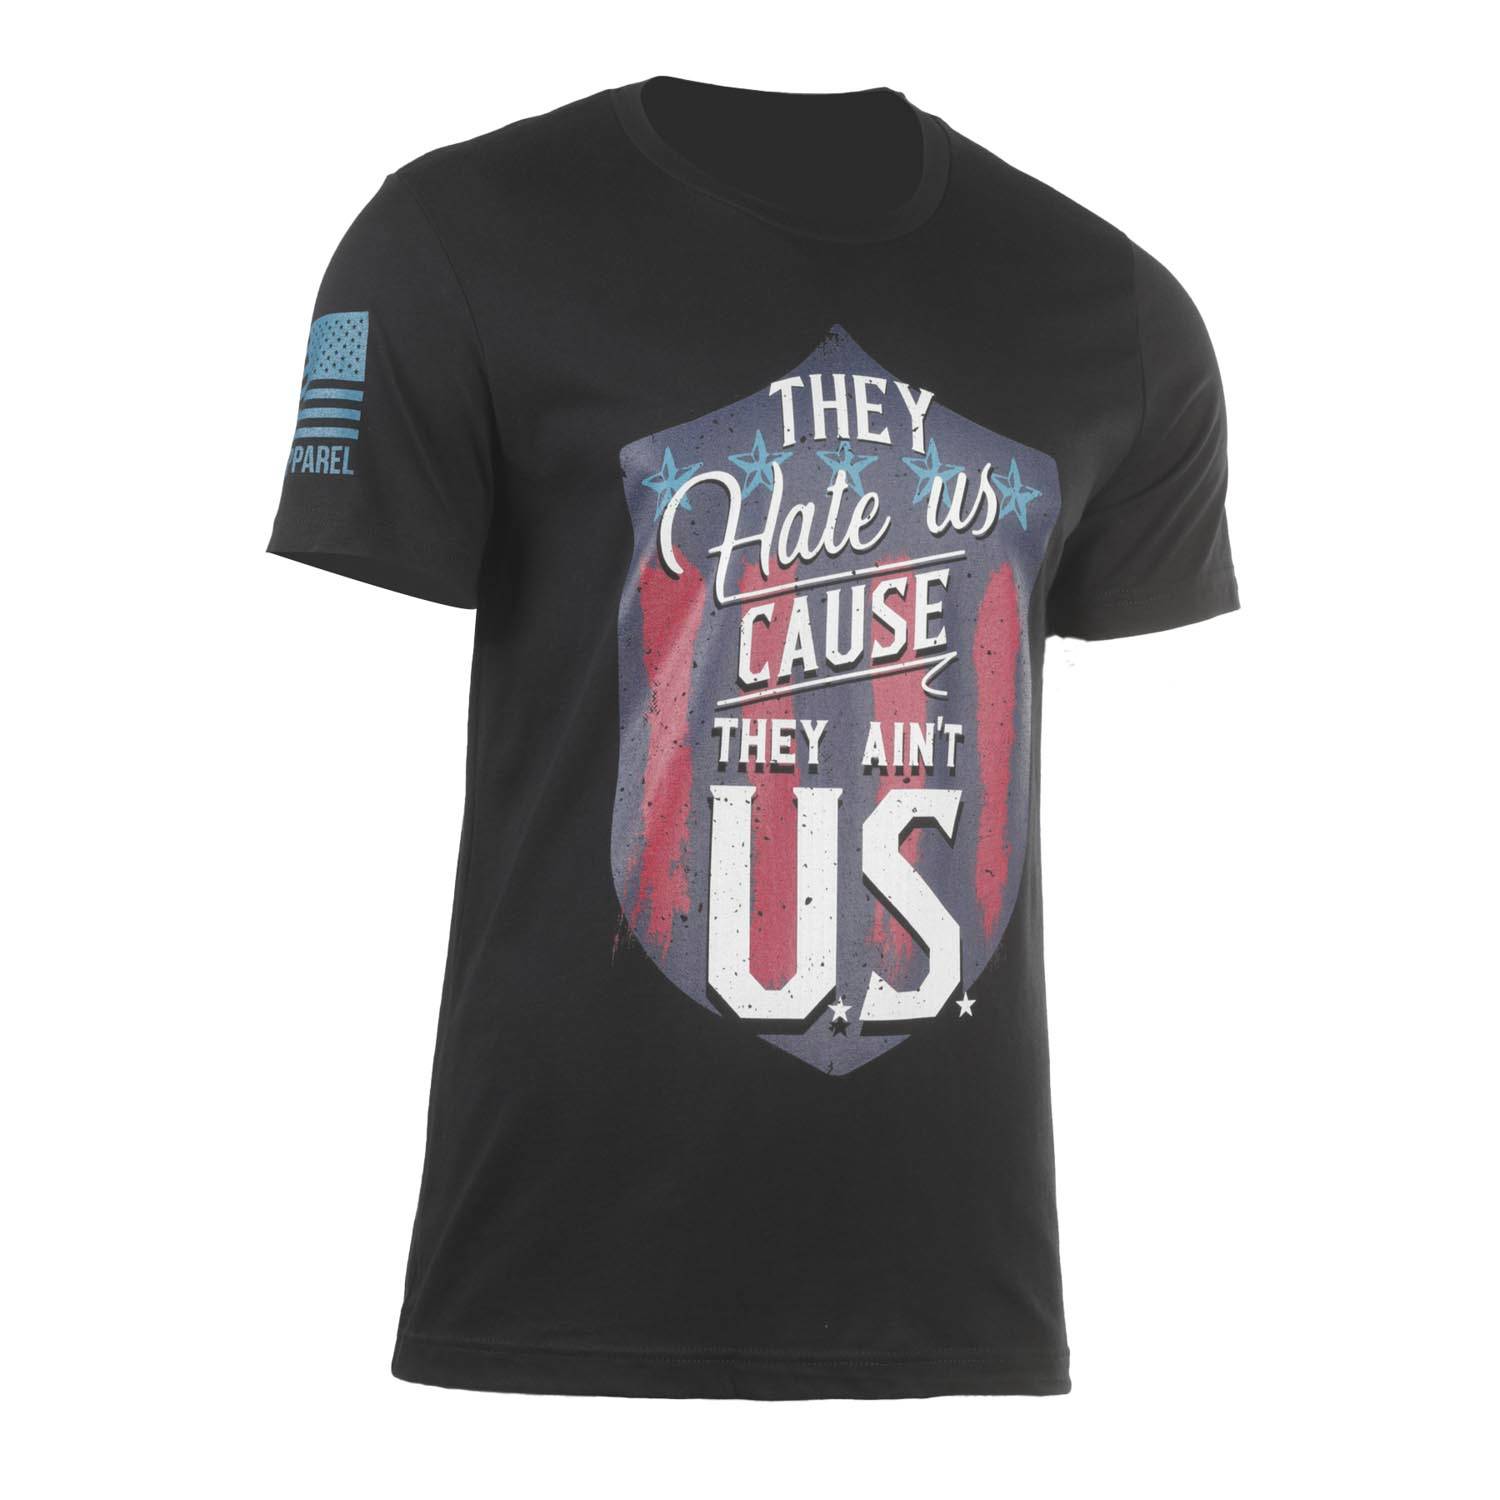 NINE LINE MEN'S HATE US CAUSE THEY AIN'T US SHIRT